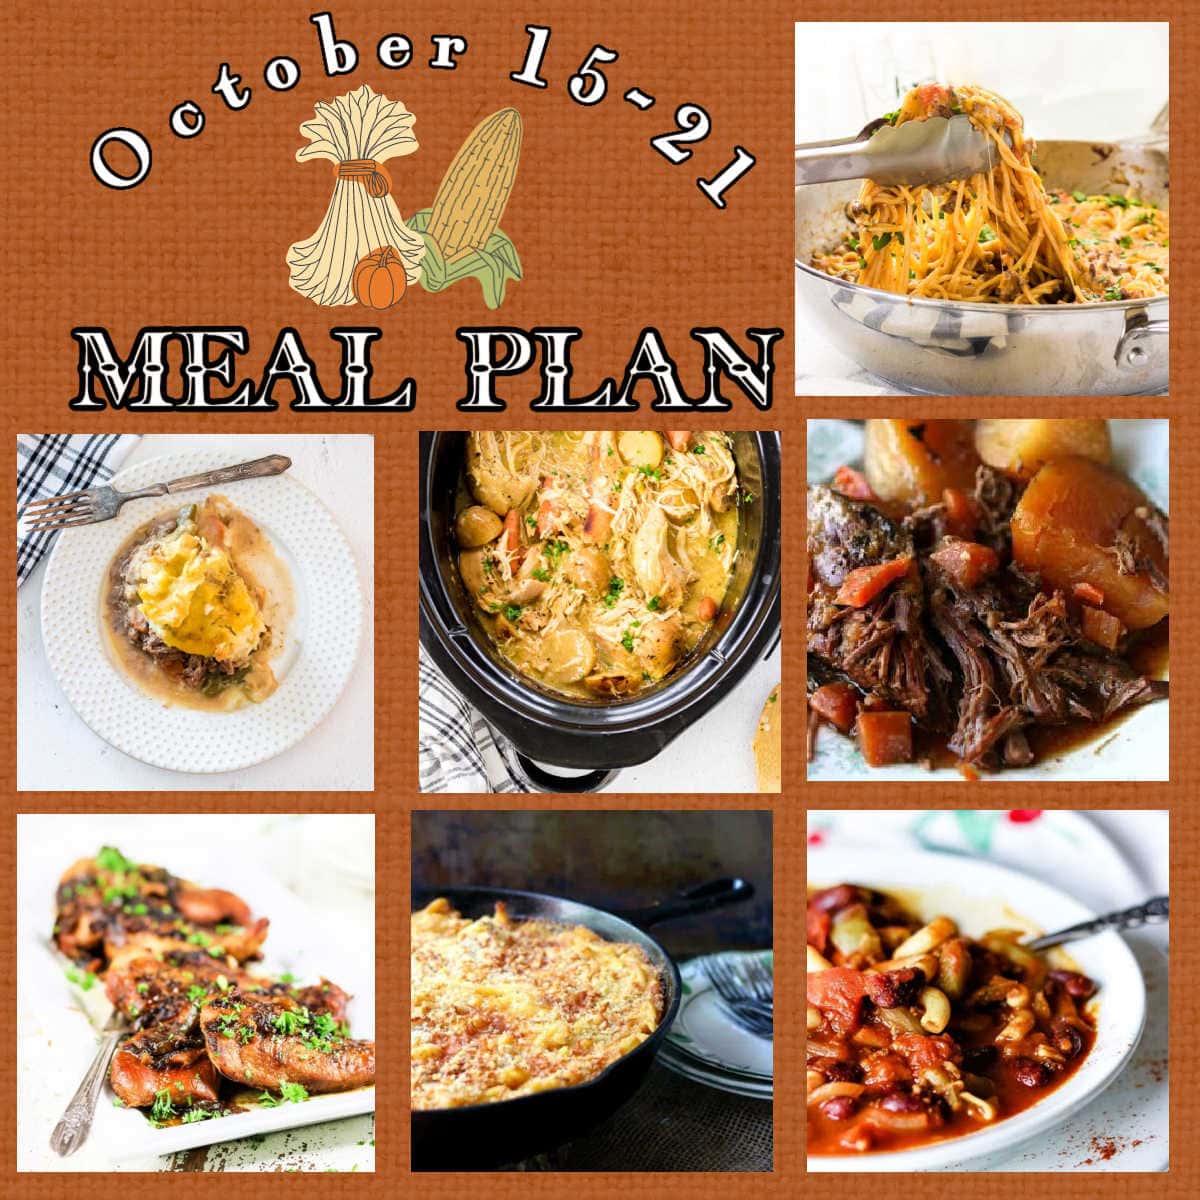 Cover image for meal plan 43 is a collage of main dish images with text overlay.